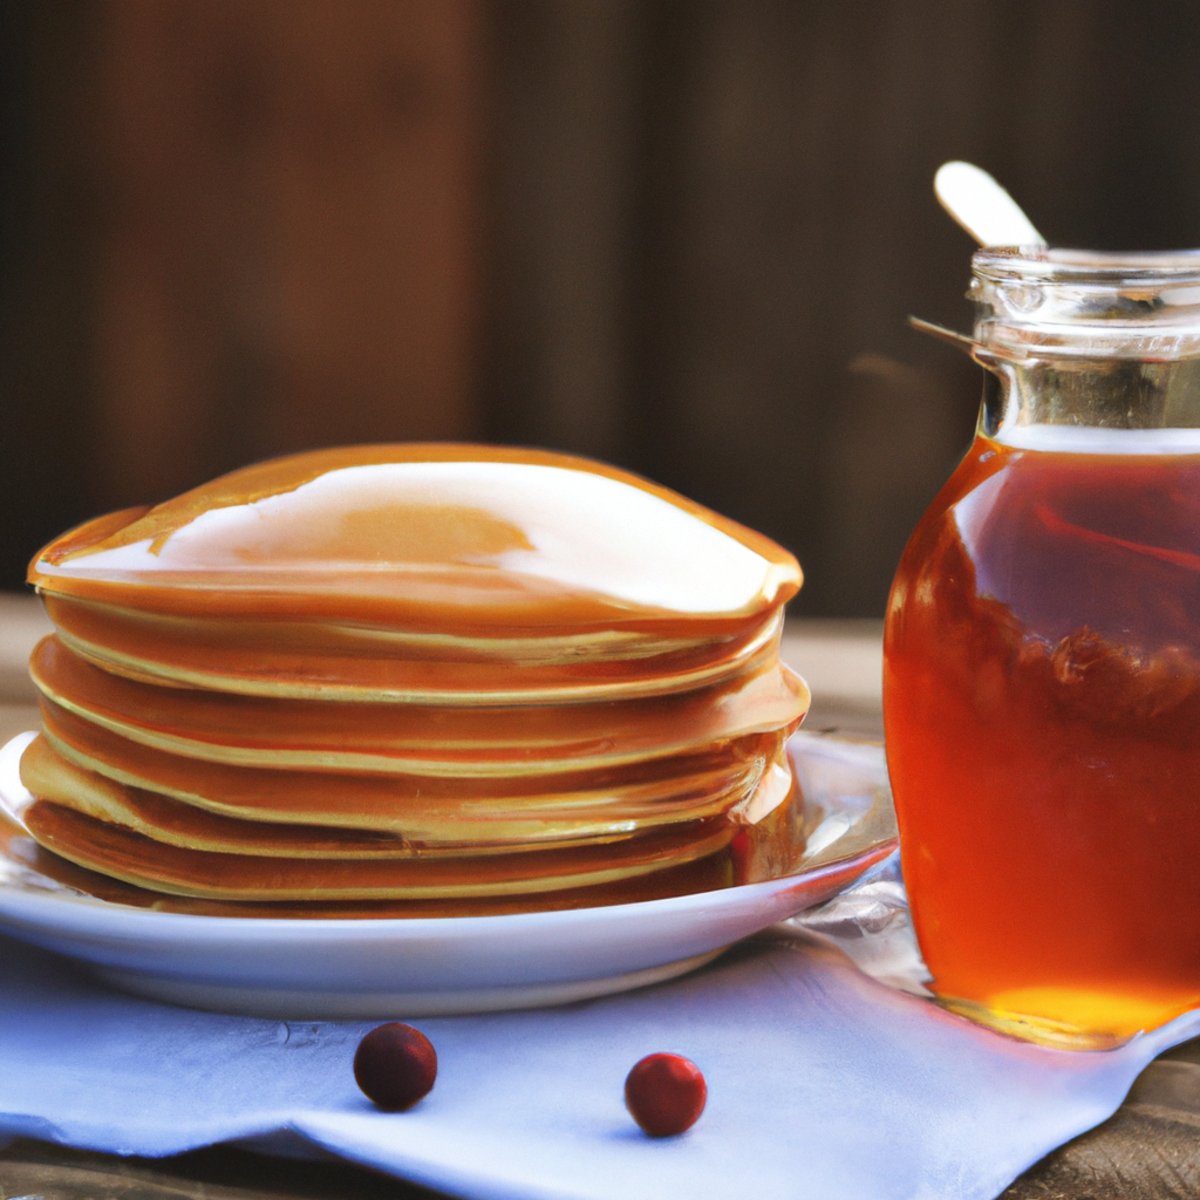 Golden maple syrup drips onto pancakes, creating a warm and comforting breakfast scene - Maple Syrup Urine Disease (MSUD)